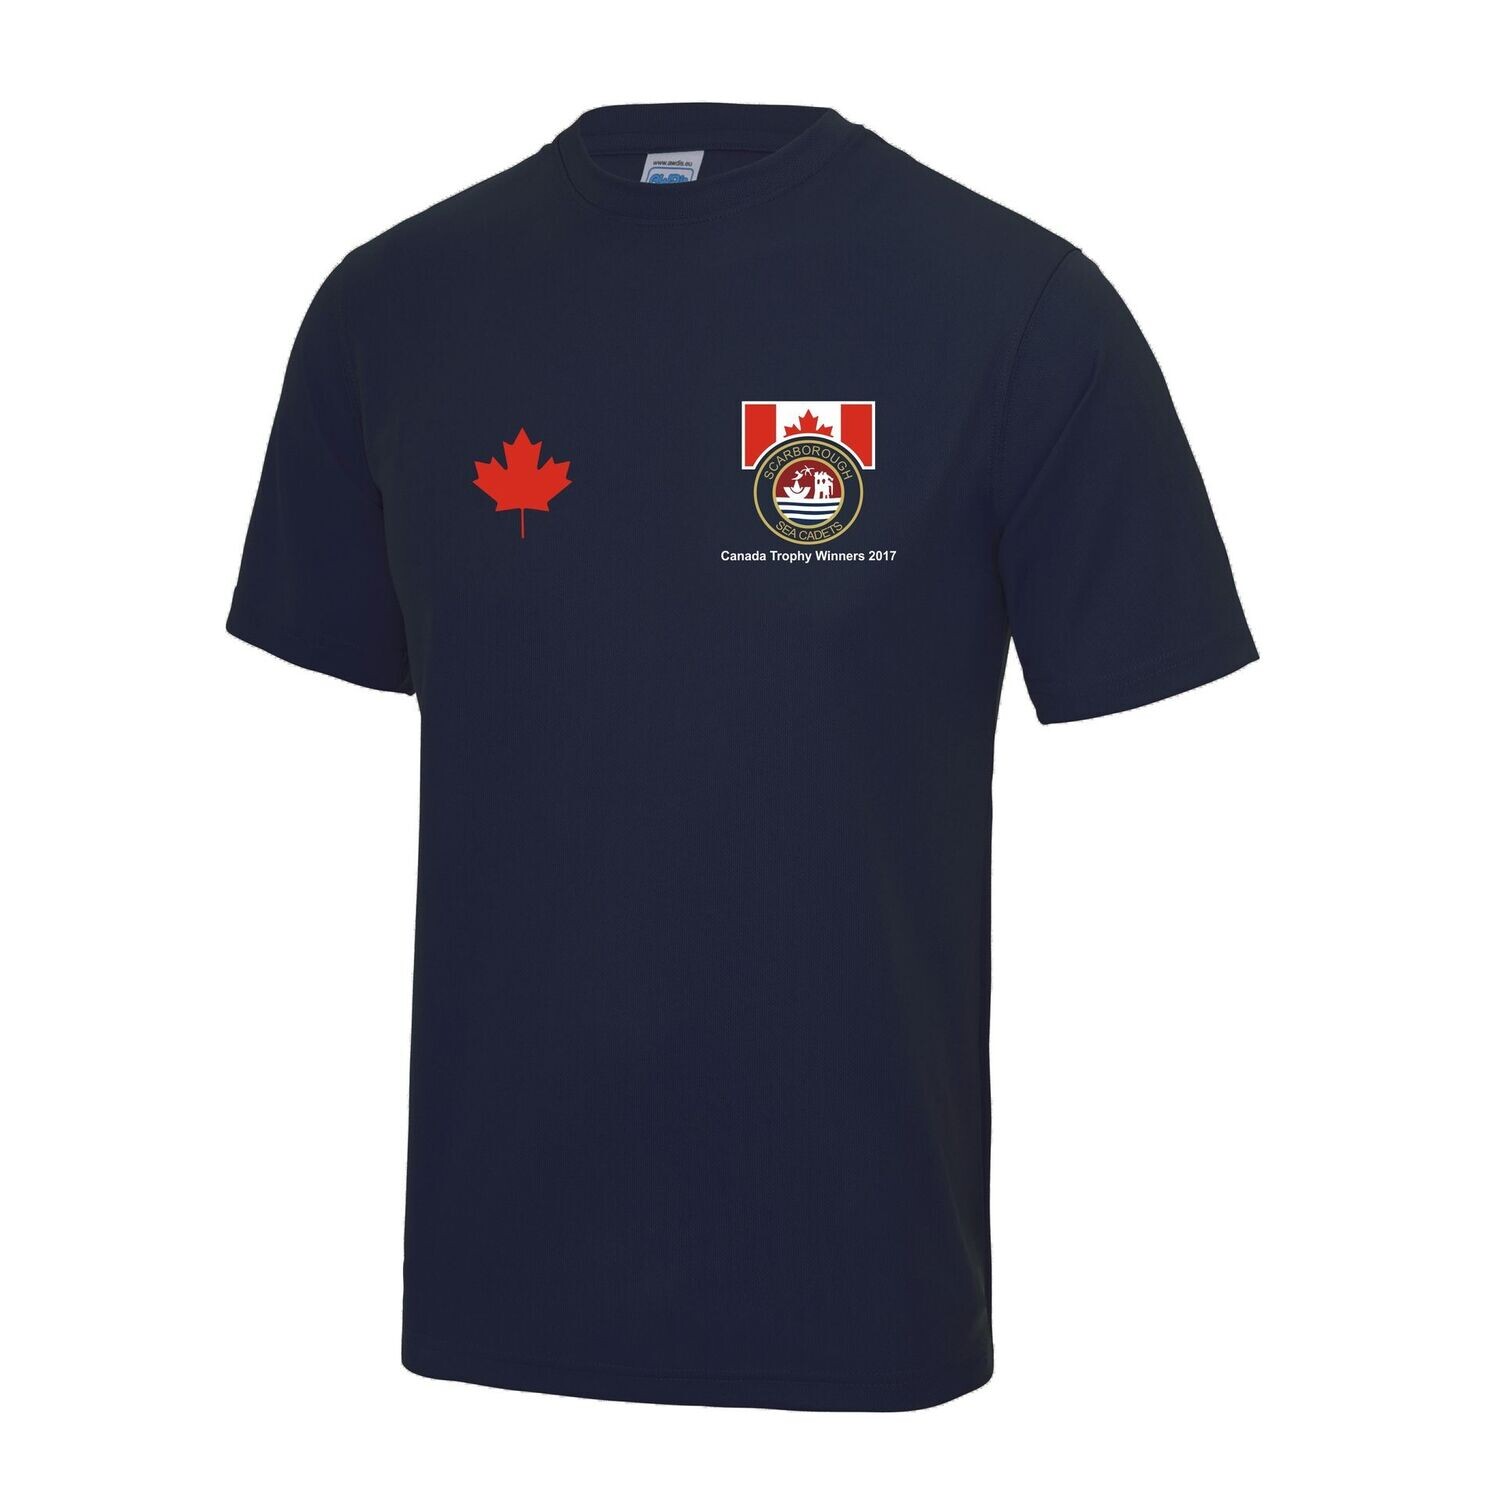 Adults' Navy Sea Cadets T Shirt (Canada Trophy Edition)